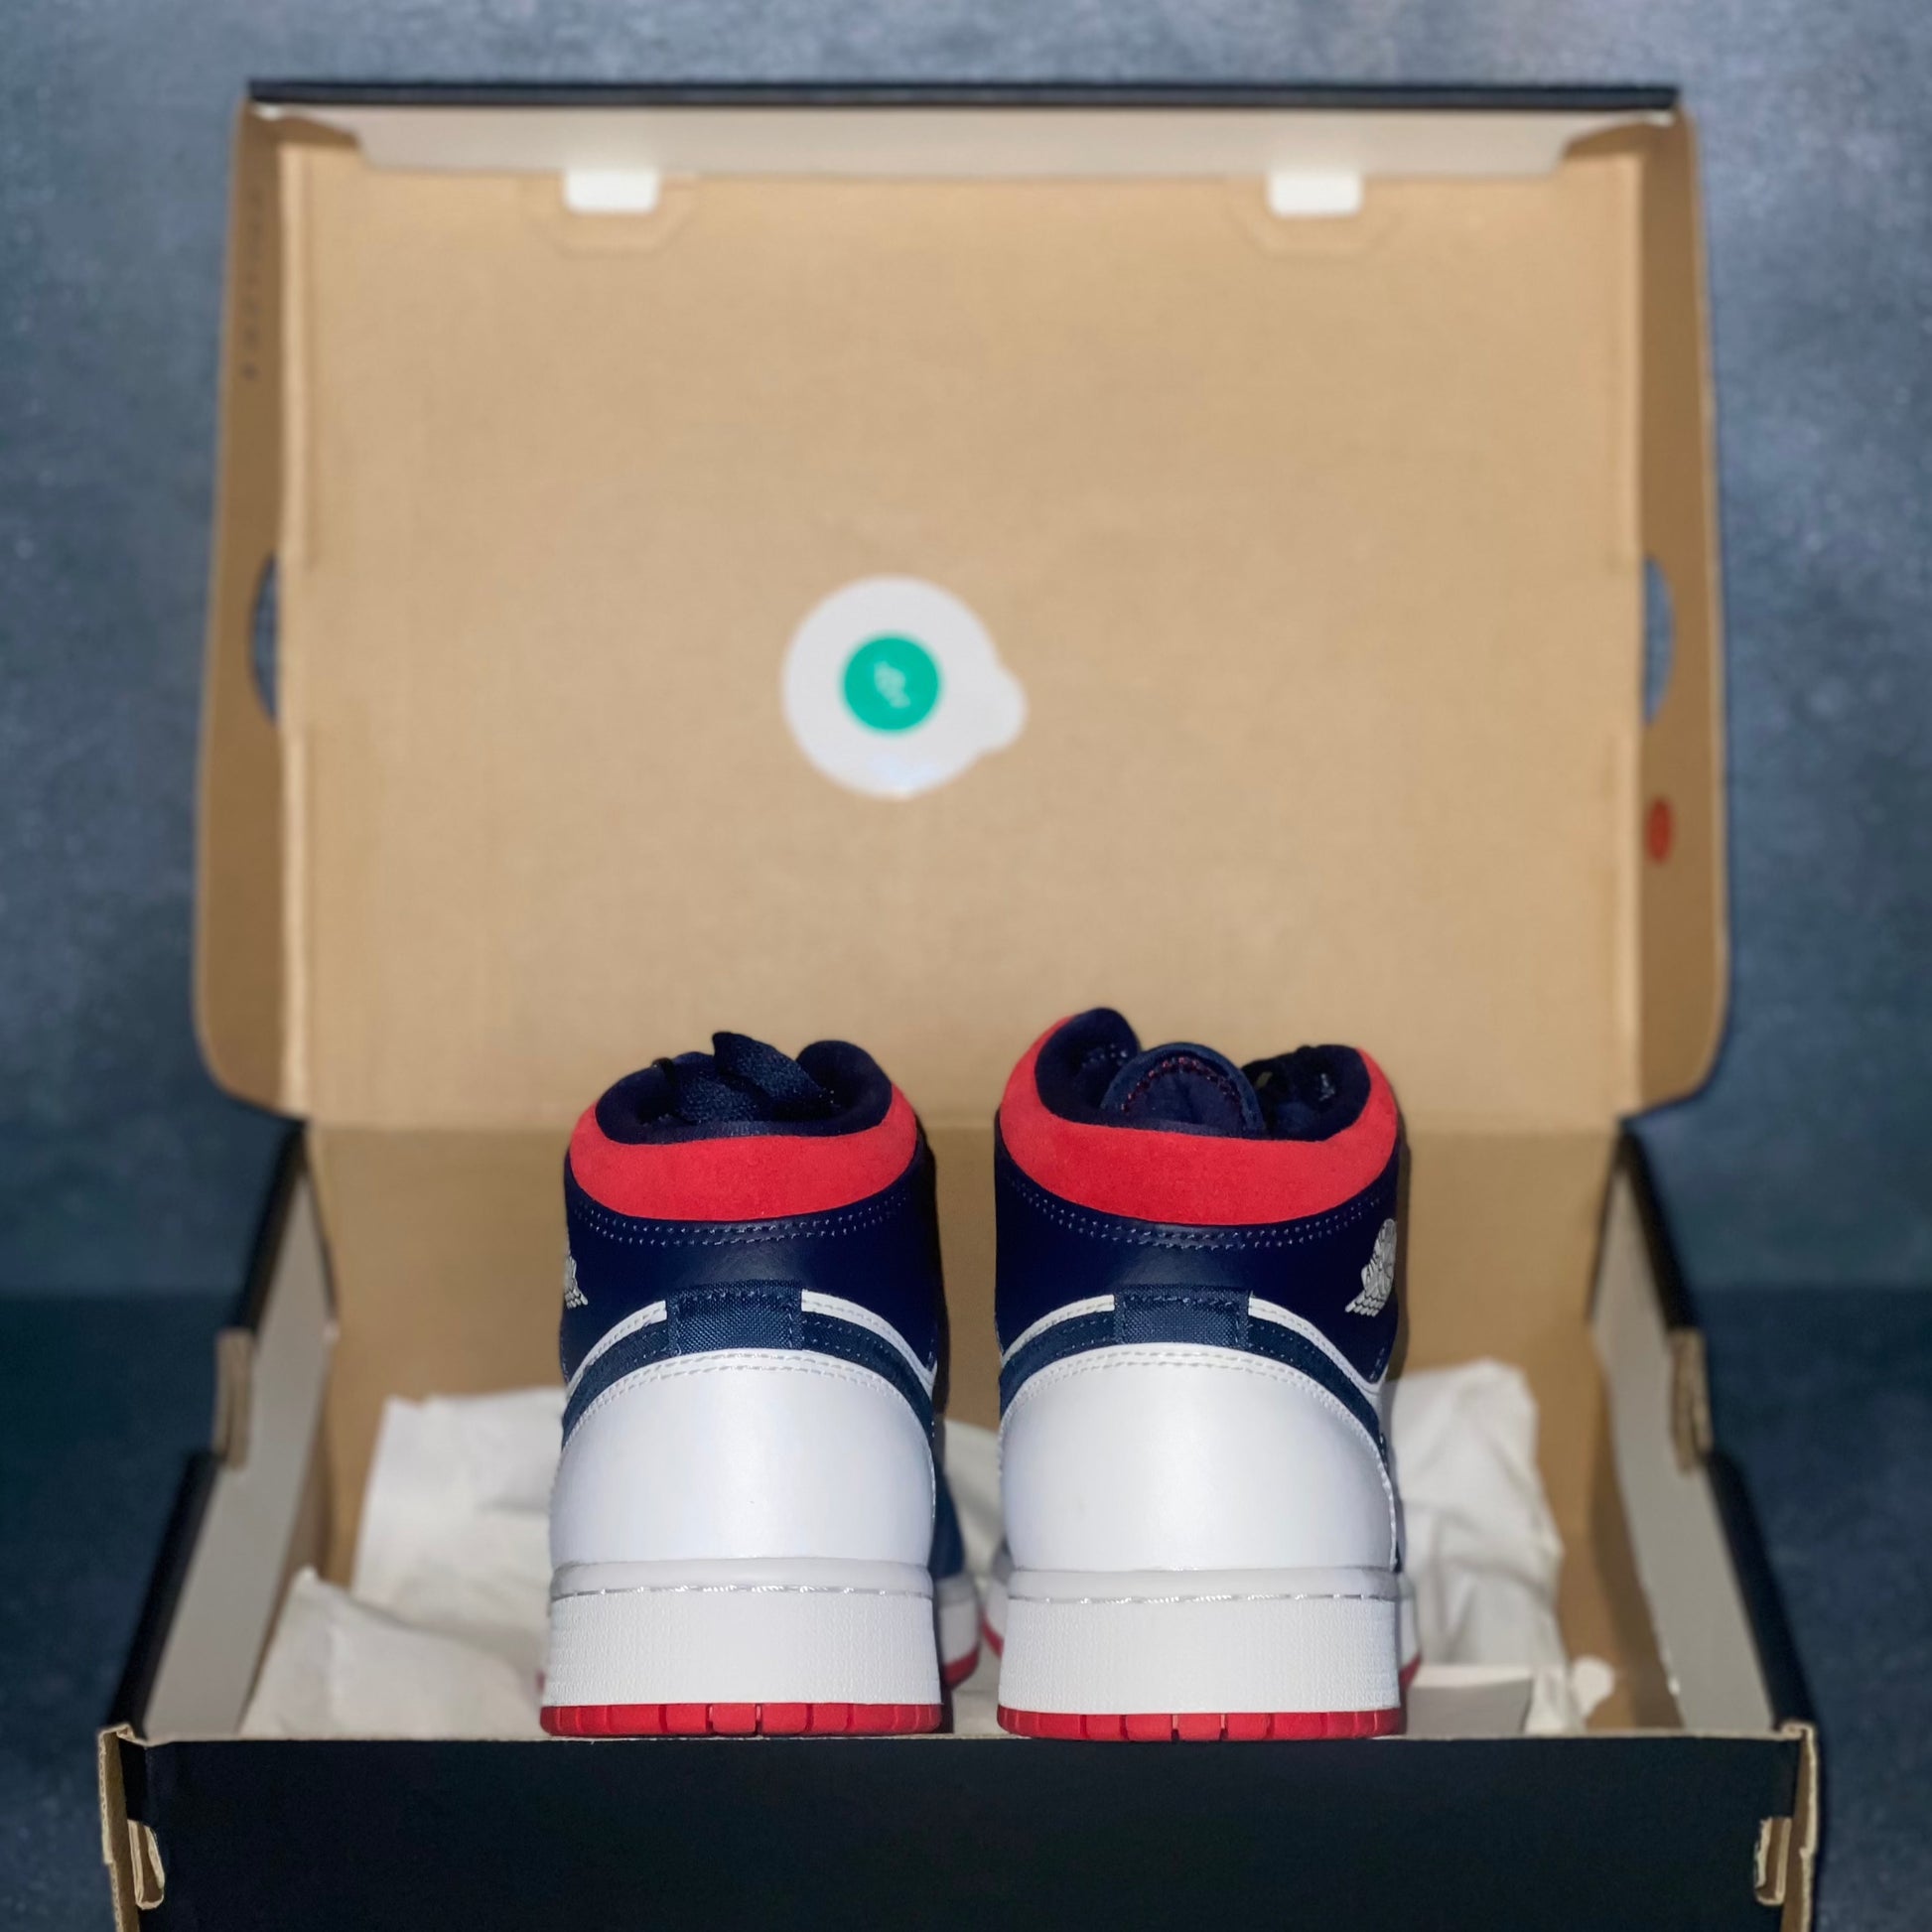 The heels of the red, white, and blue Nike Air Jordan 1 Mid sneakers with a black Air Jordan sneaker box.